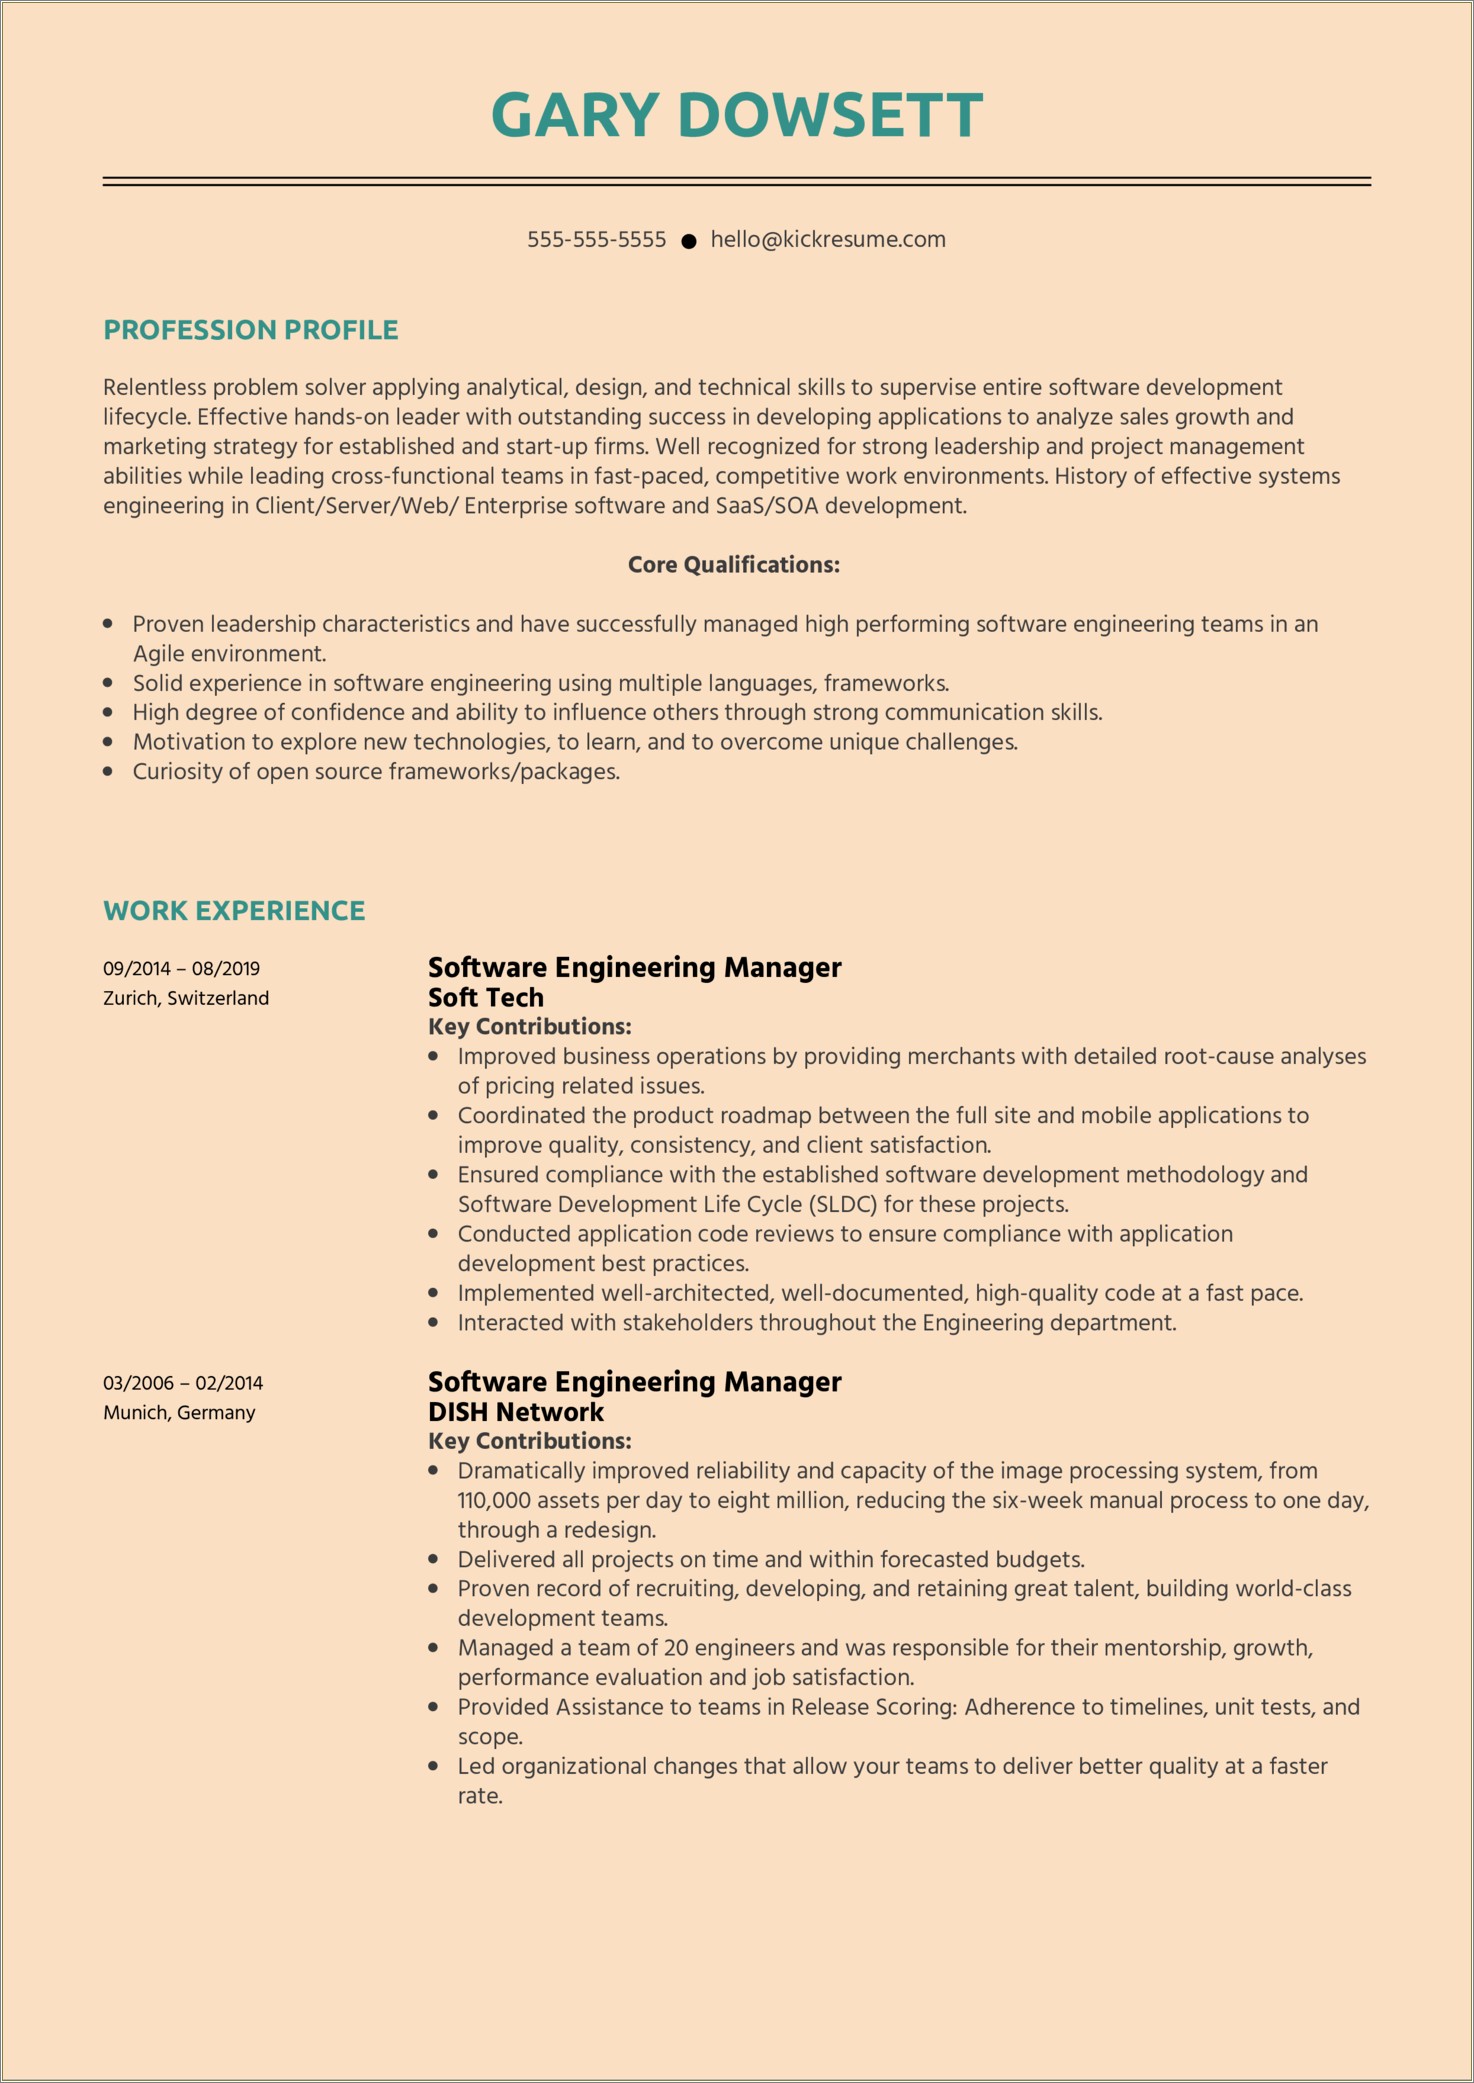 Resume Agile And Time Management Skills Soft